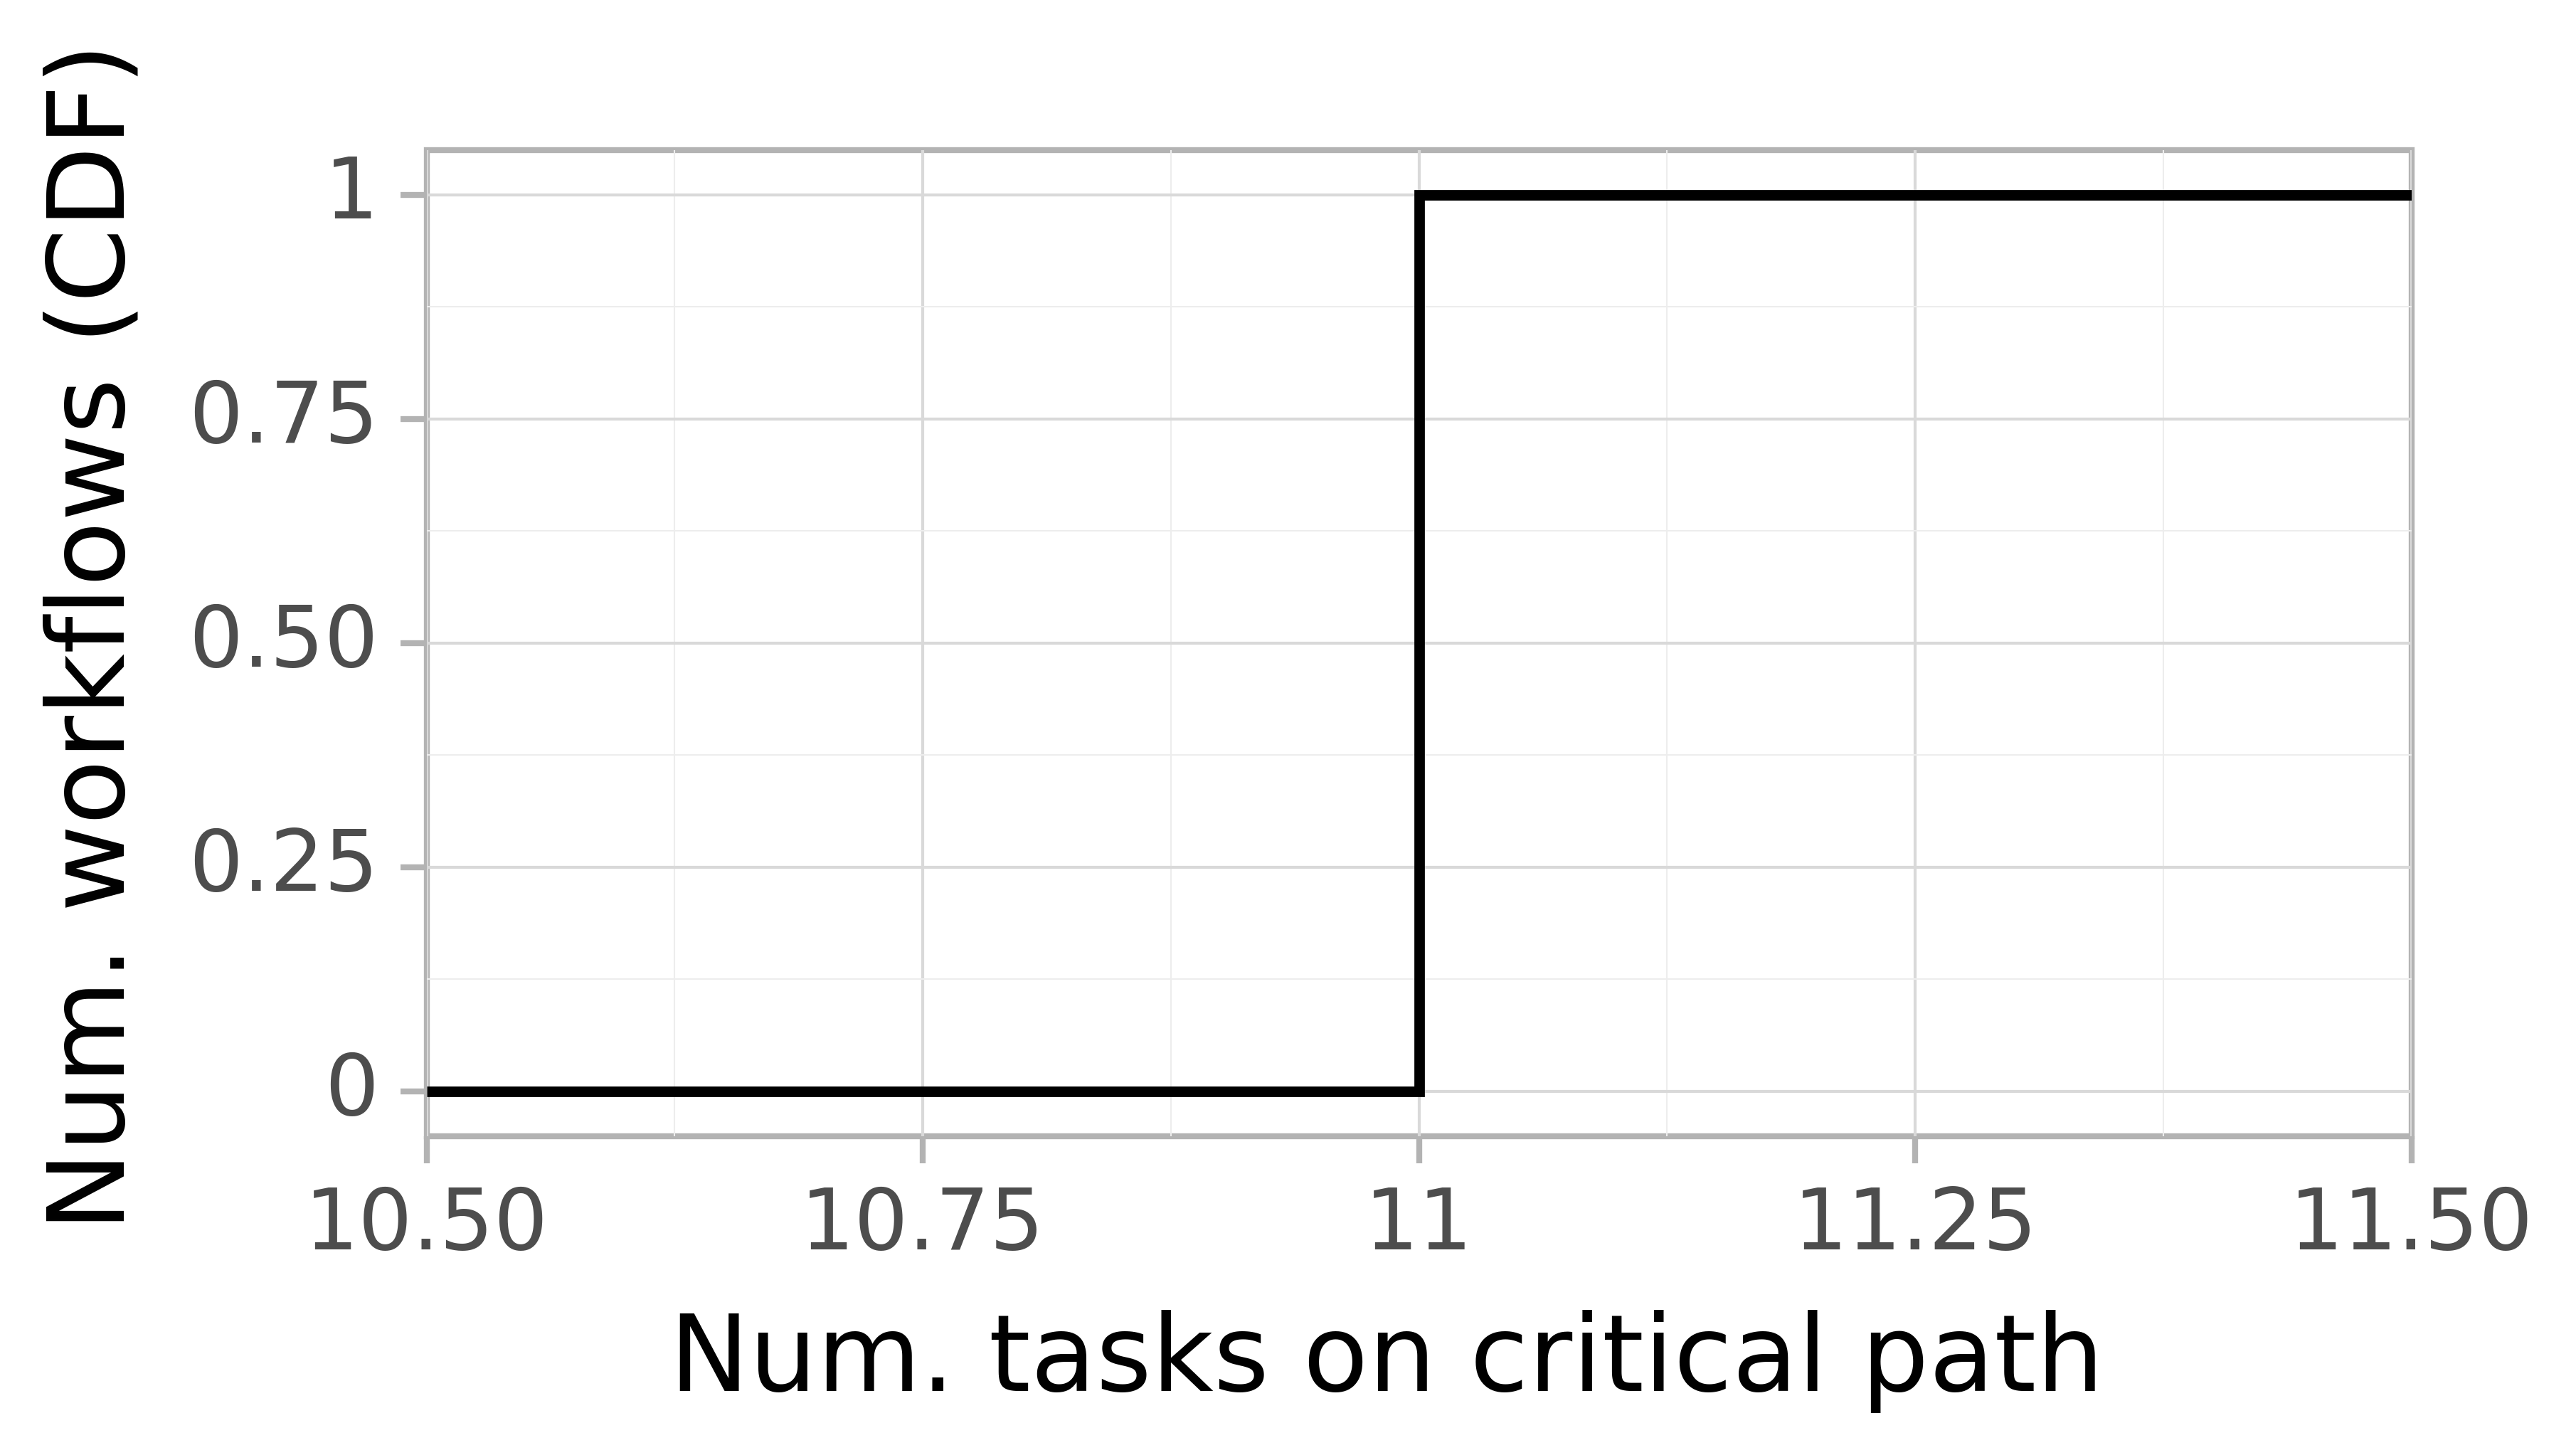 Job critical path task count graph for the workflowhub_montage_dataset-02_degree-4-0_osg_schema-0-2_montage-4-0-osg-run009 trace.